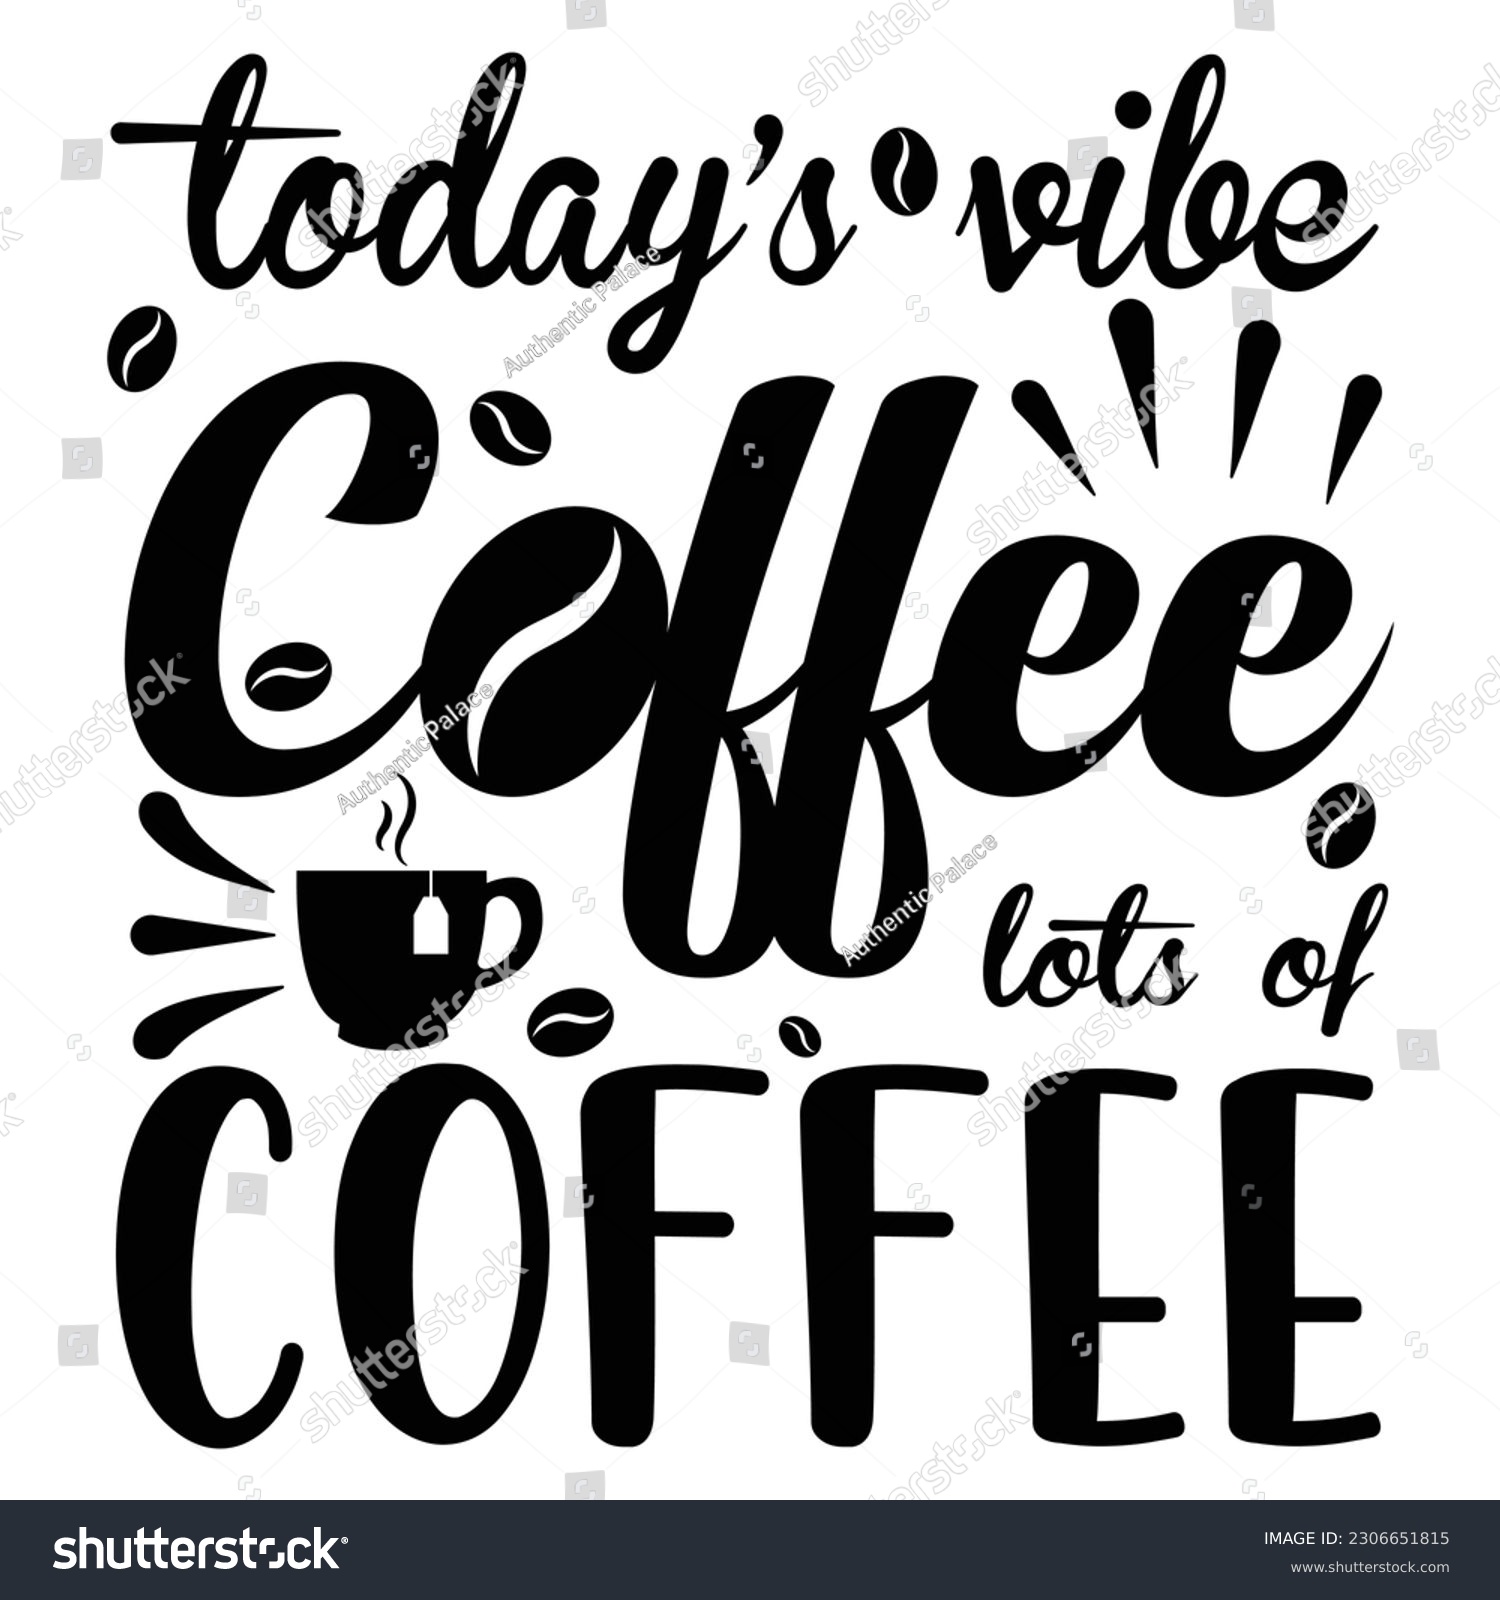 SVG of Today's coffee lots of coffee svg tshirt design bundle,  svg t shirt design,design for print on demand, coffee T-shirt Design, Typography Print,Modern coffee typography, shirt design for print,
 svg